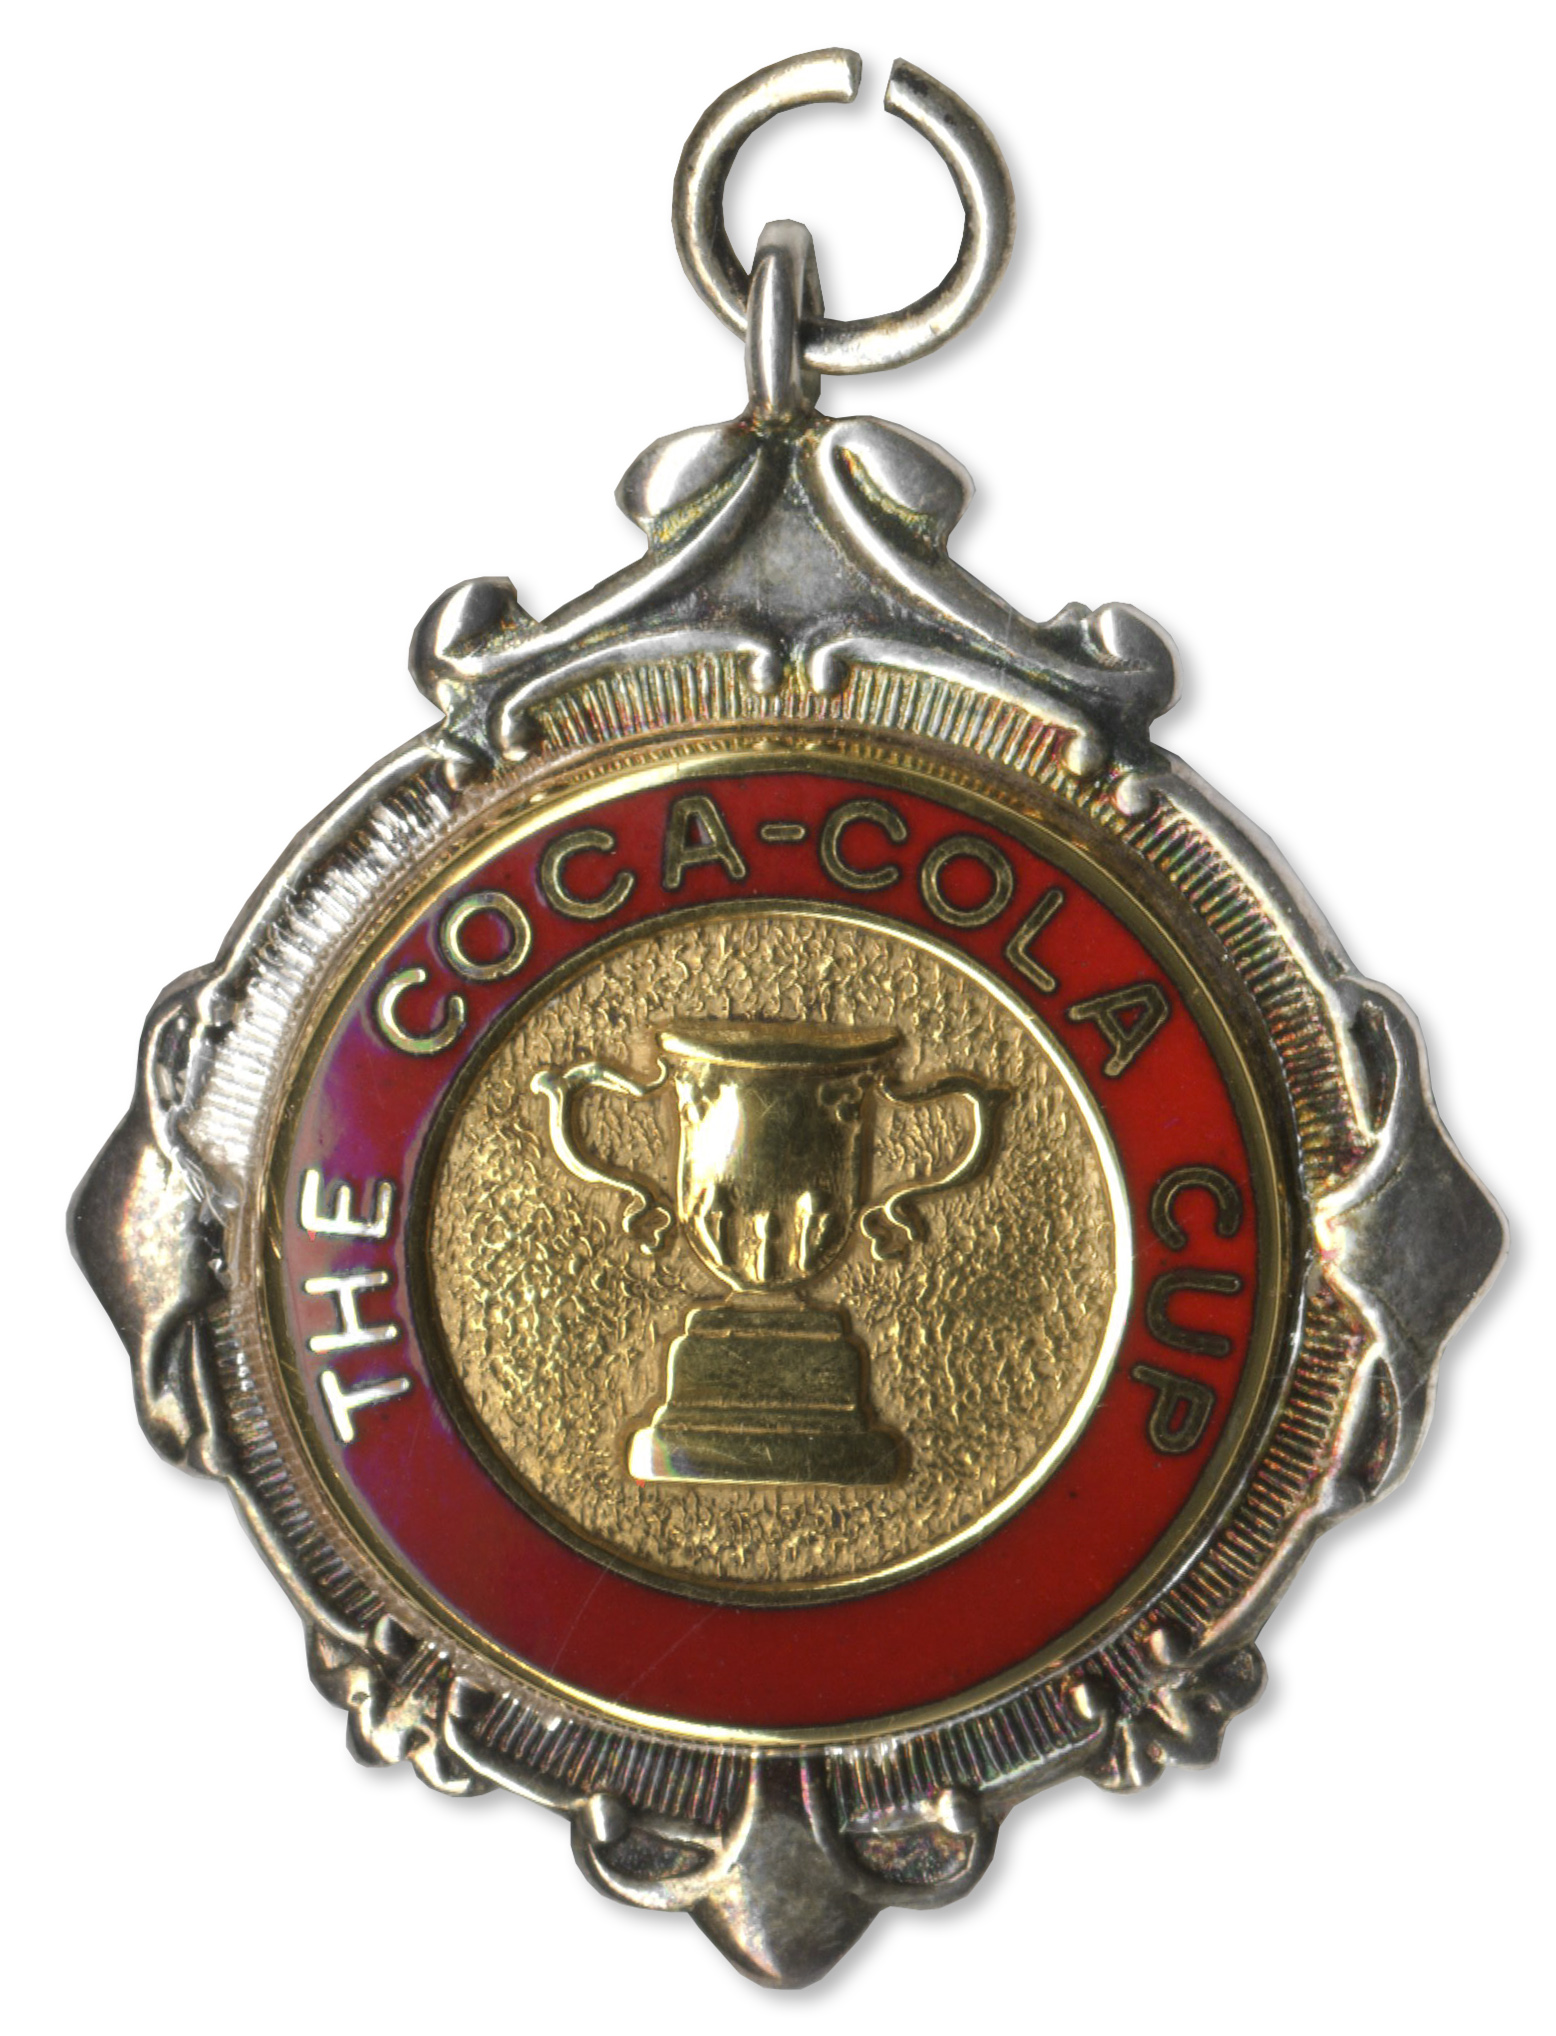 1998 League Cup runners-up medal awarded to Middlesbrough central defender Steve Vickers. The - Image 4 of 4